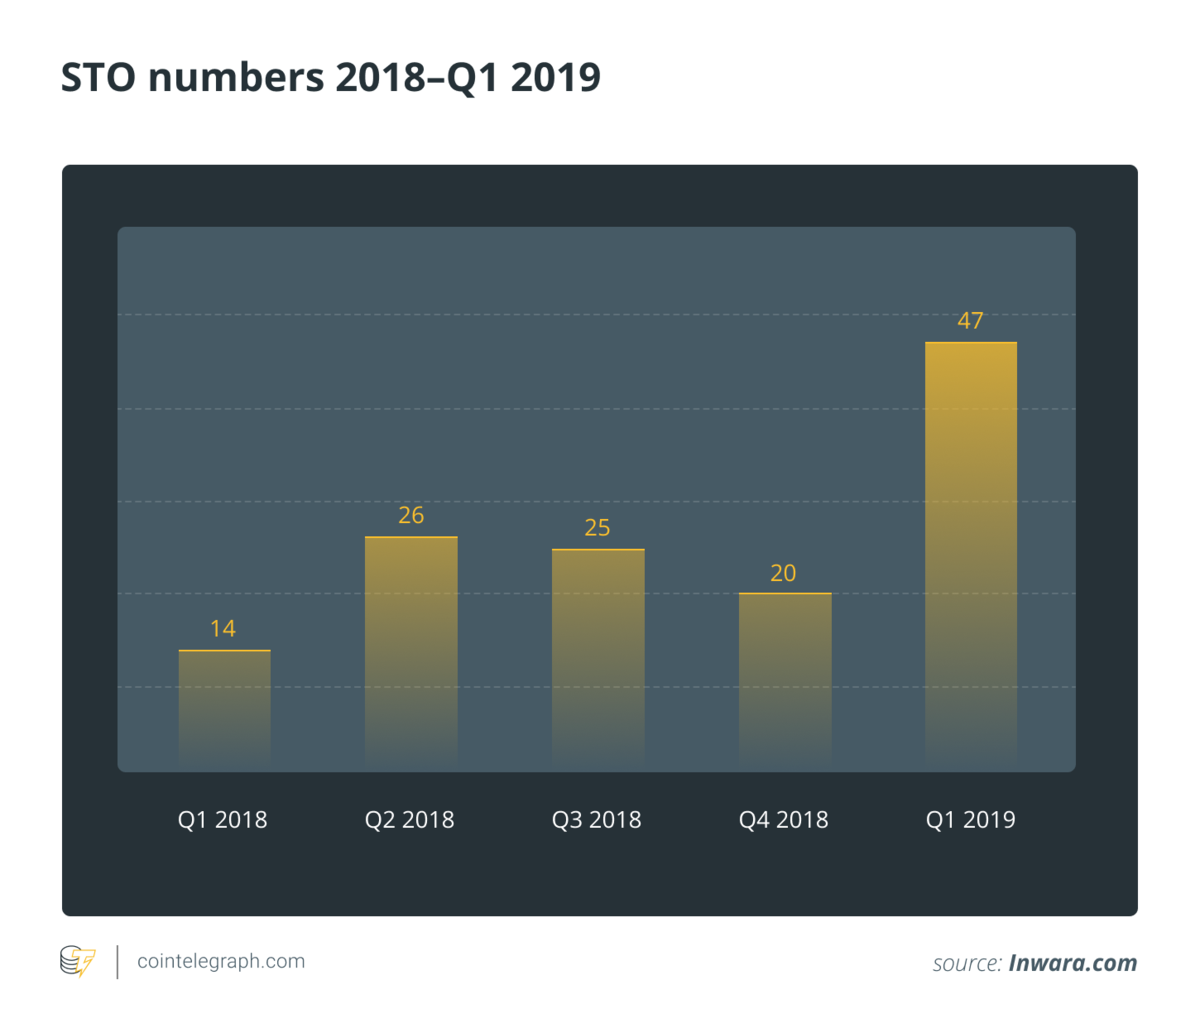 STO numbers are growing in 2019